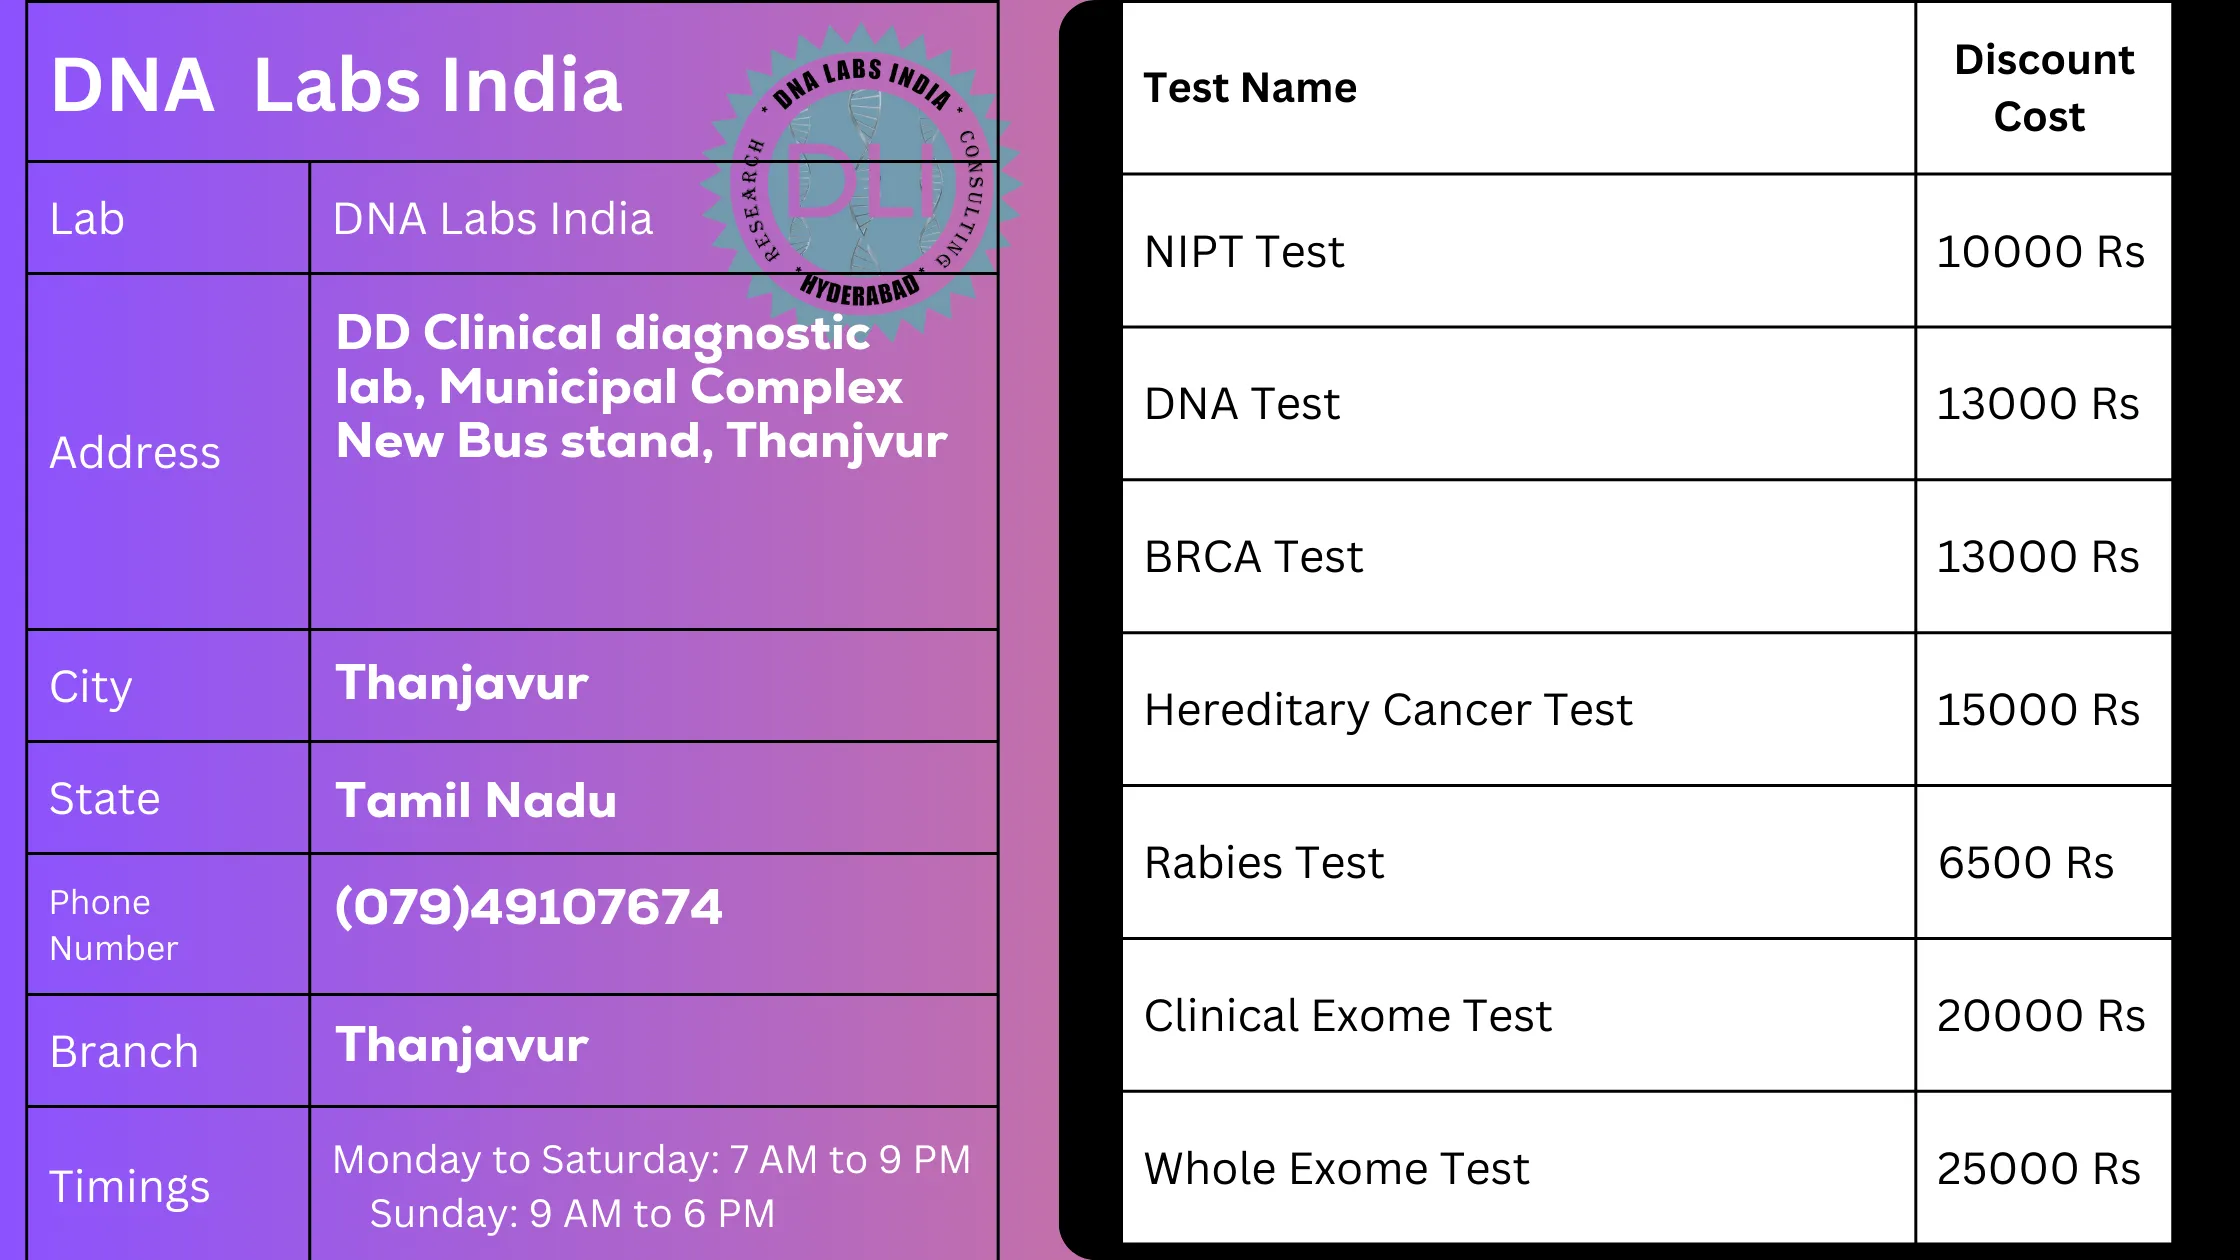 DNA Labs India - Thanjavur: Your Trusted Genetic Testing Partner